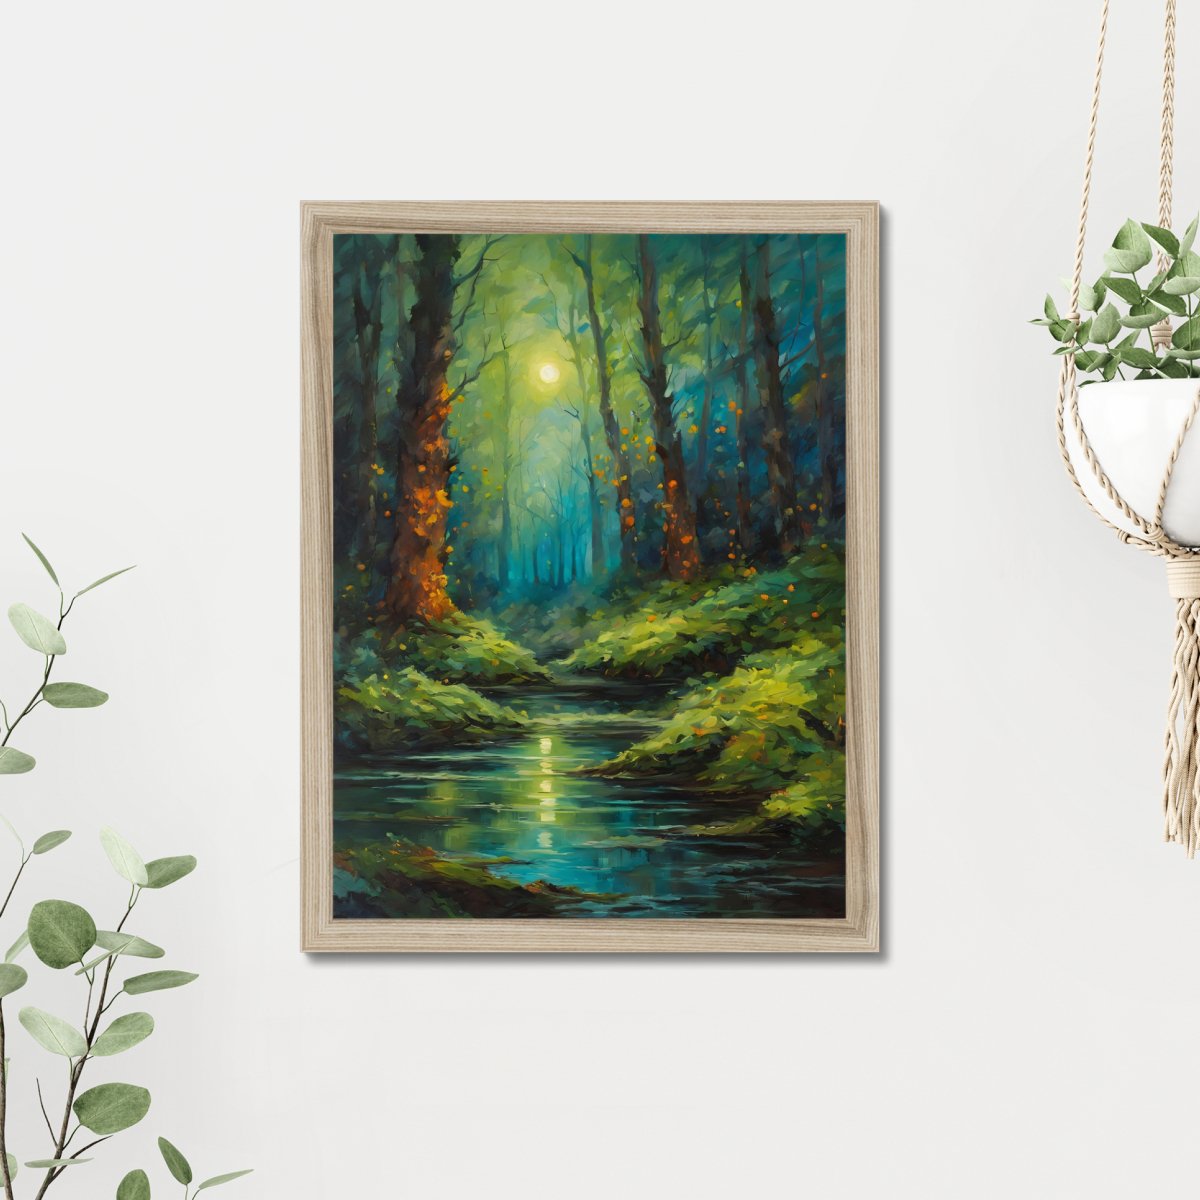 Foggy evergreen night - Art print - Poster - Ever colorful